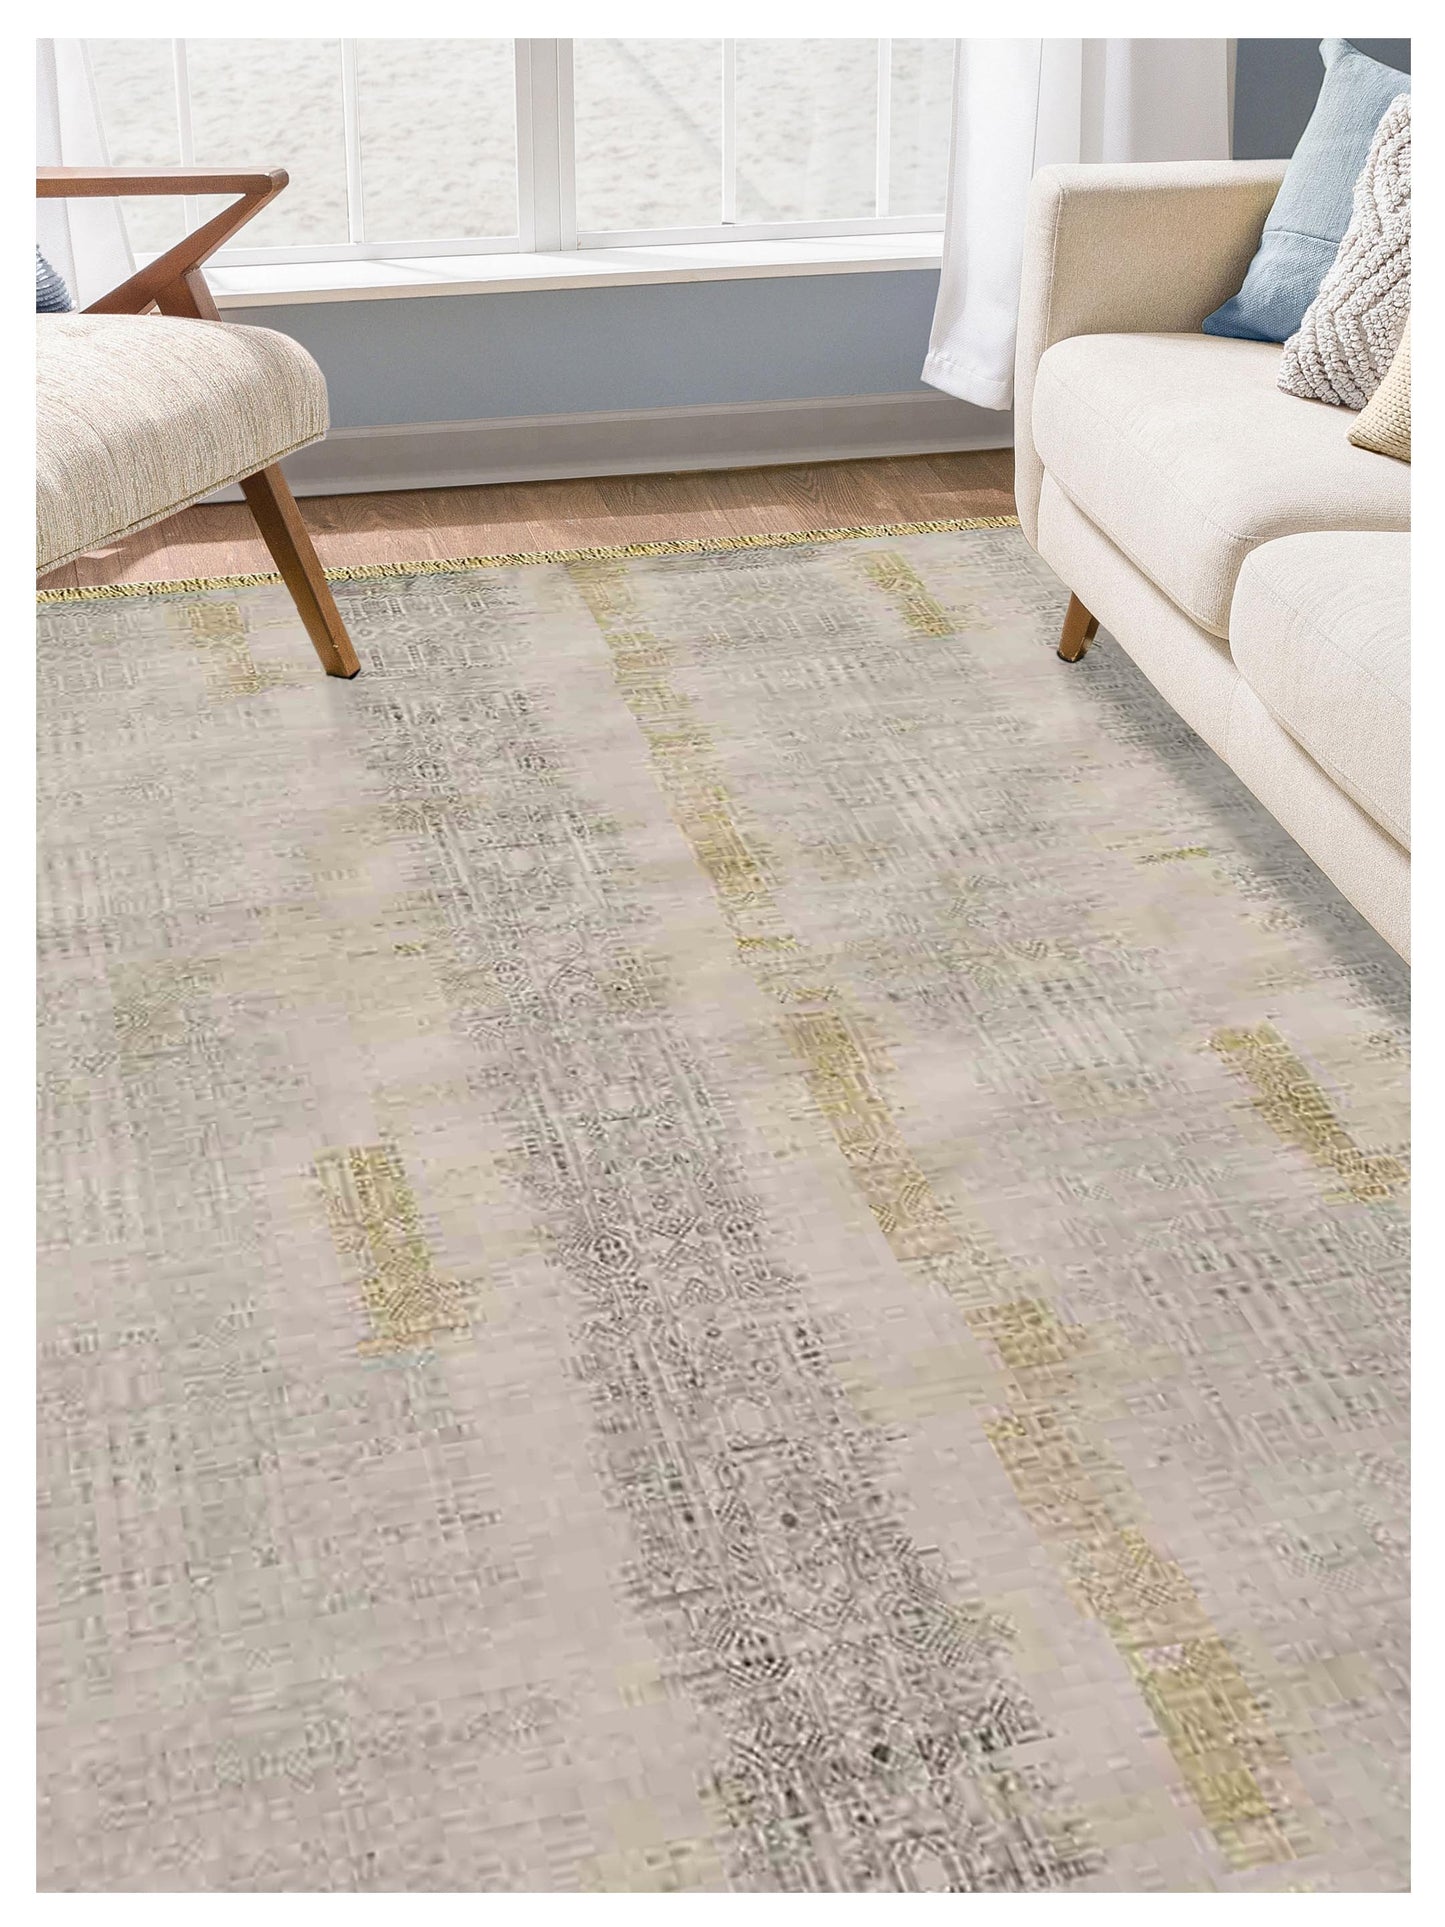 Limited PARKES PA-566 Mushroom  Transitional Knotted Rug